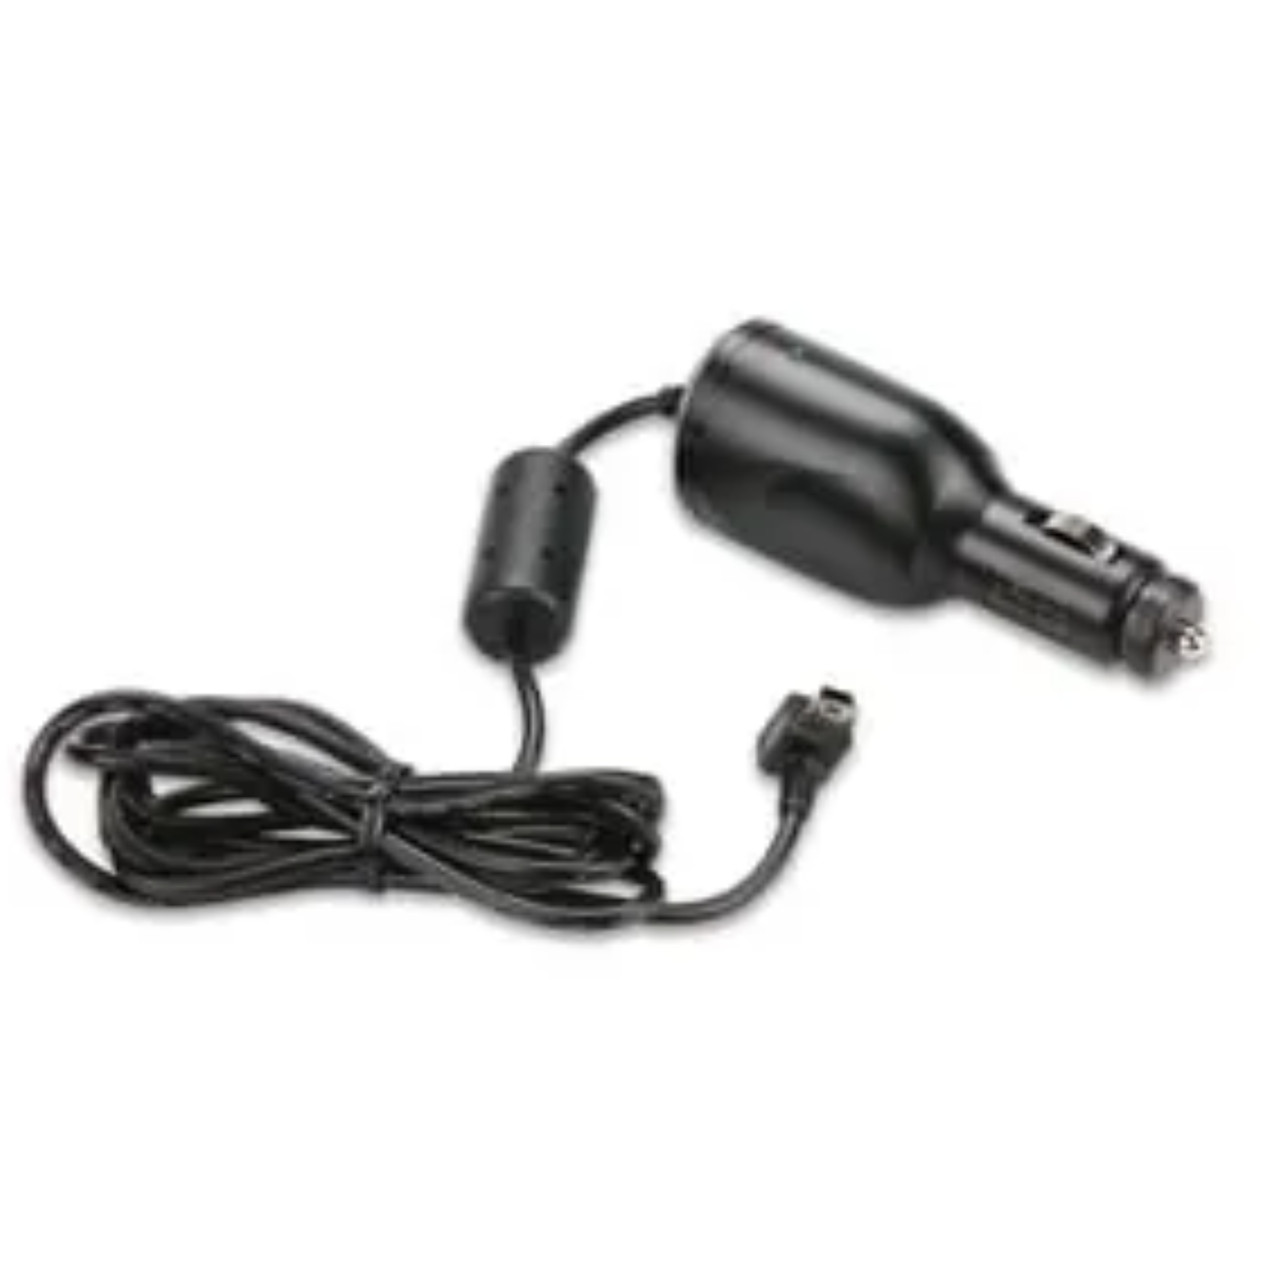 Garmin New OEM Vehicle Power Cable, 010-10851-12